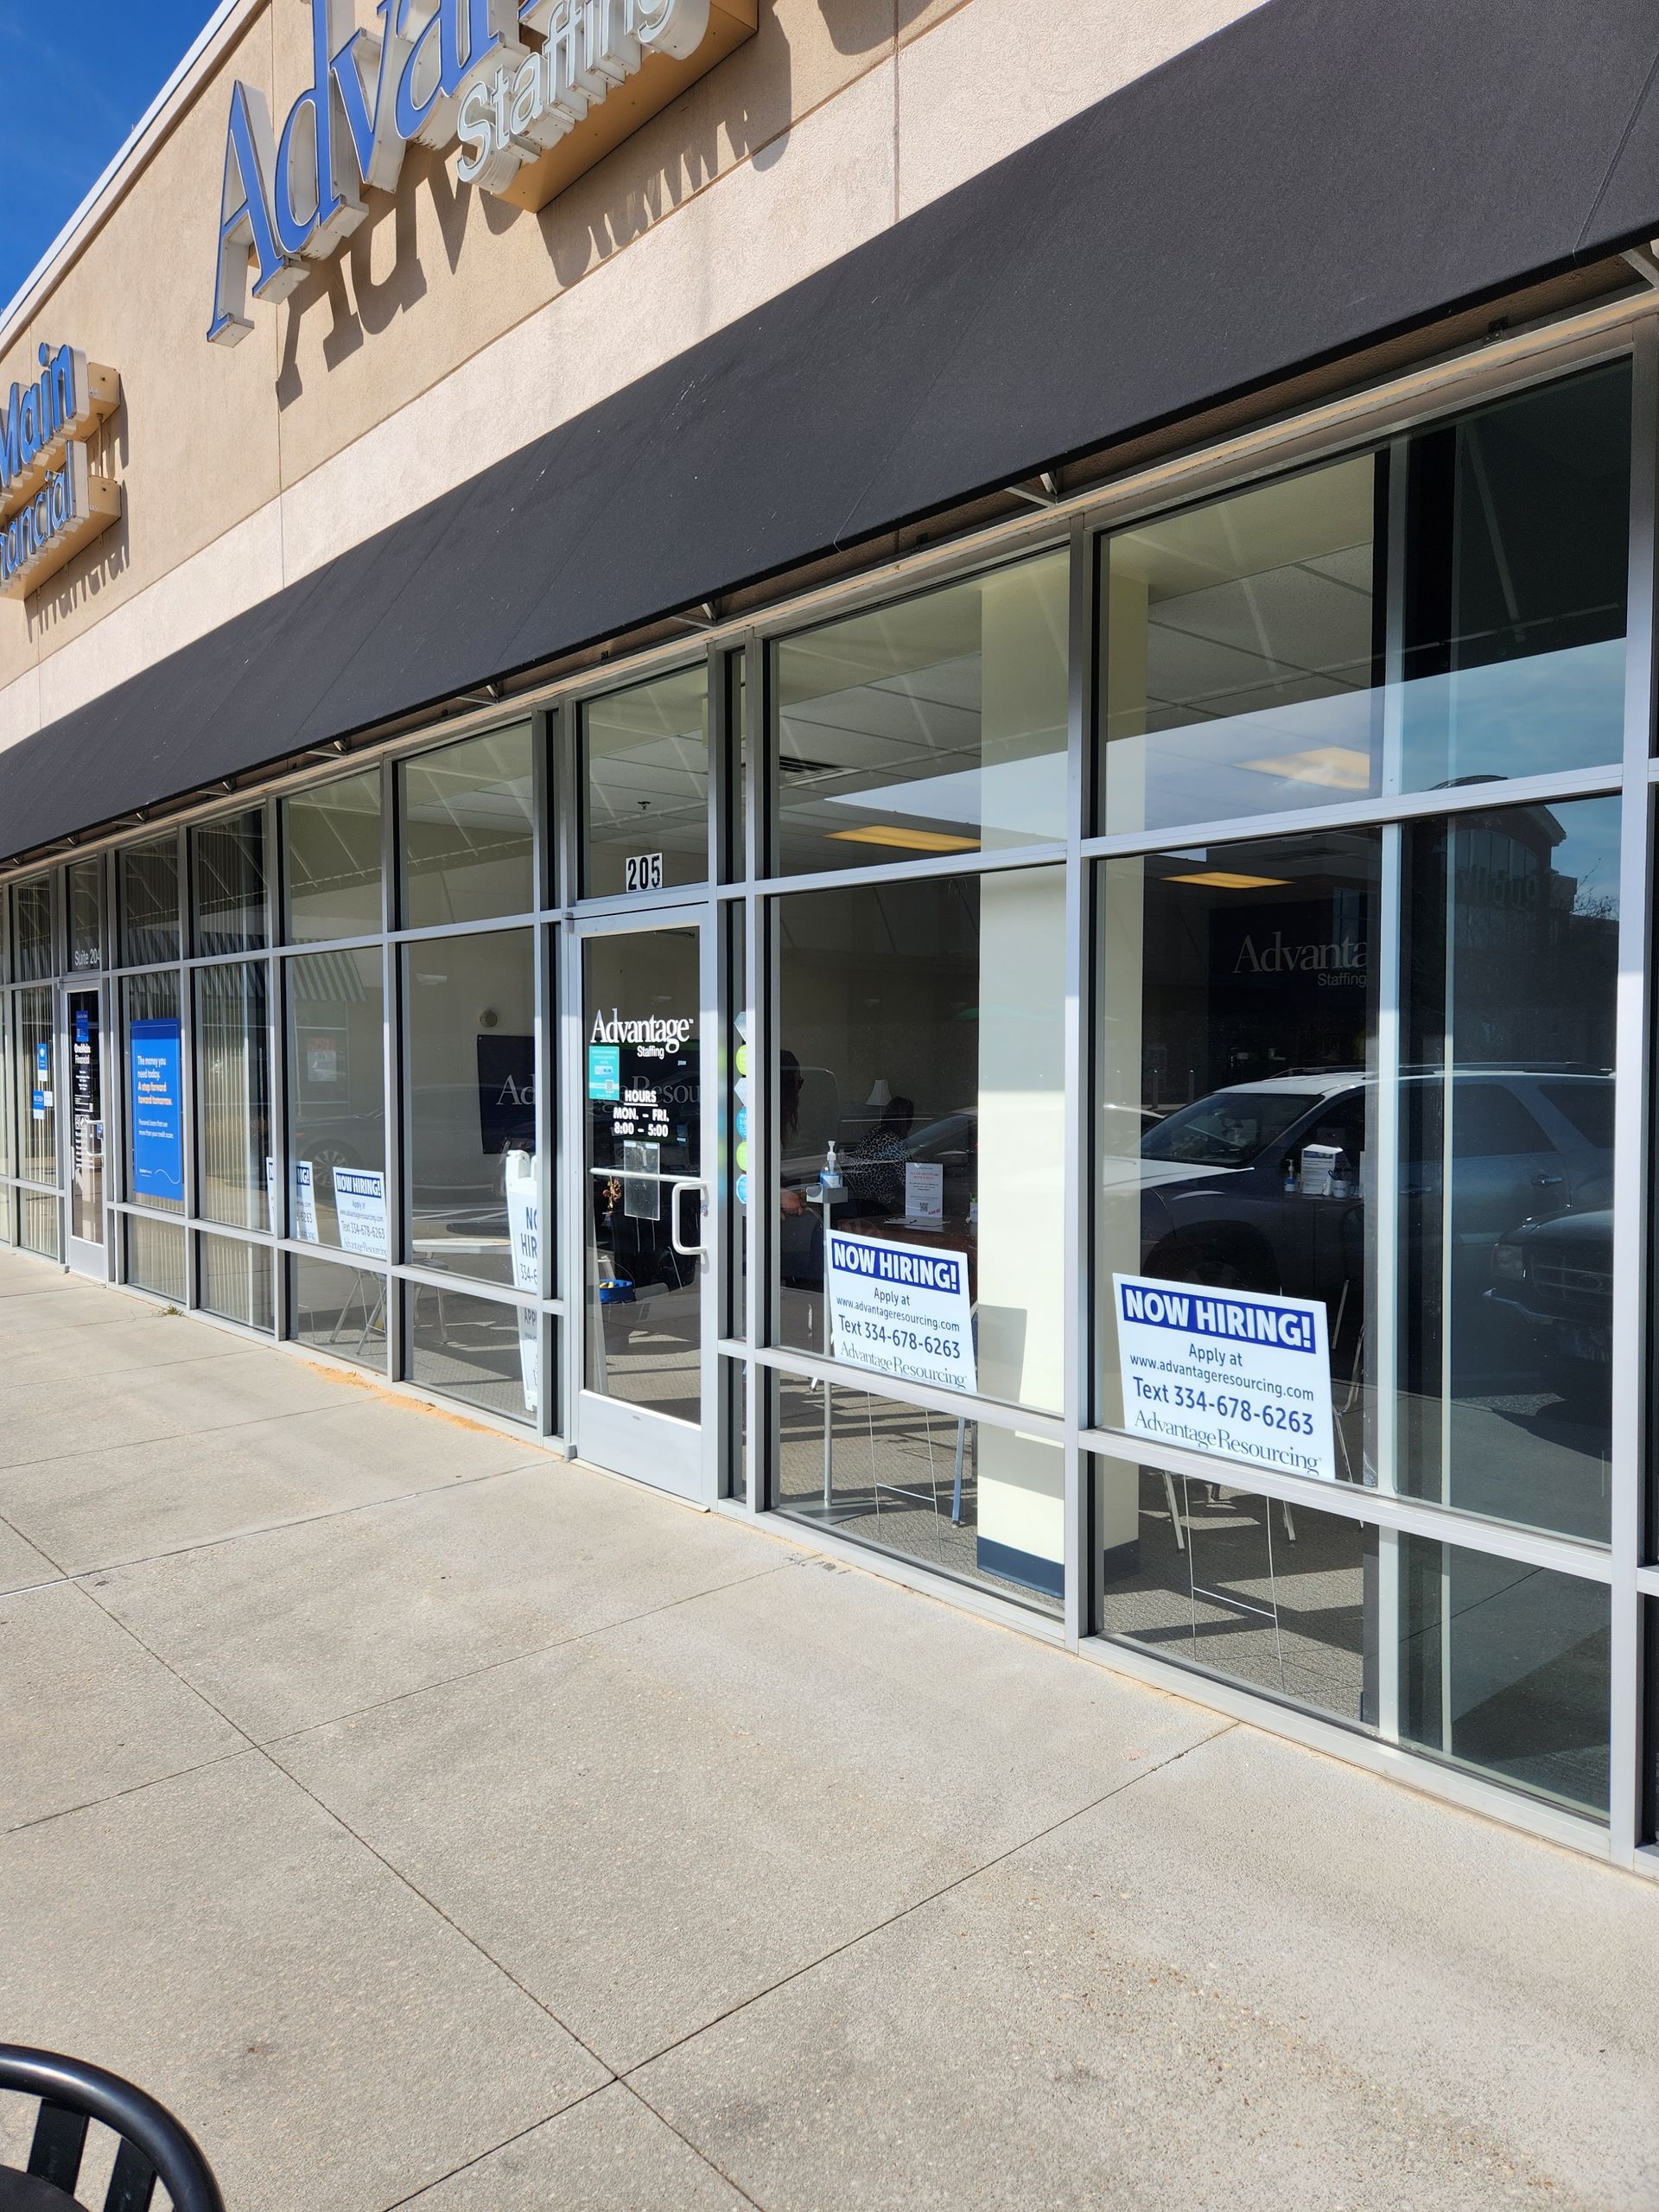 home or storefront window tint - Before SPF Ultra Tint adds new window function blocking record heat to combat the Sun flooding inside. Dothan, AL